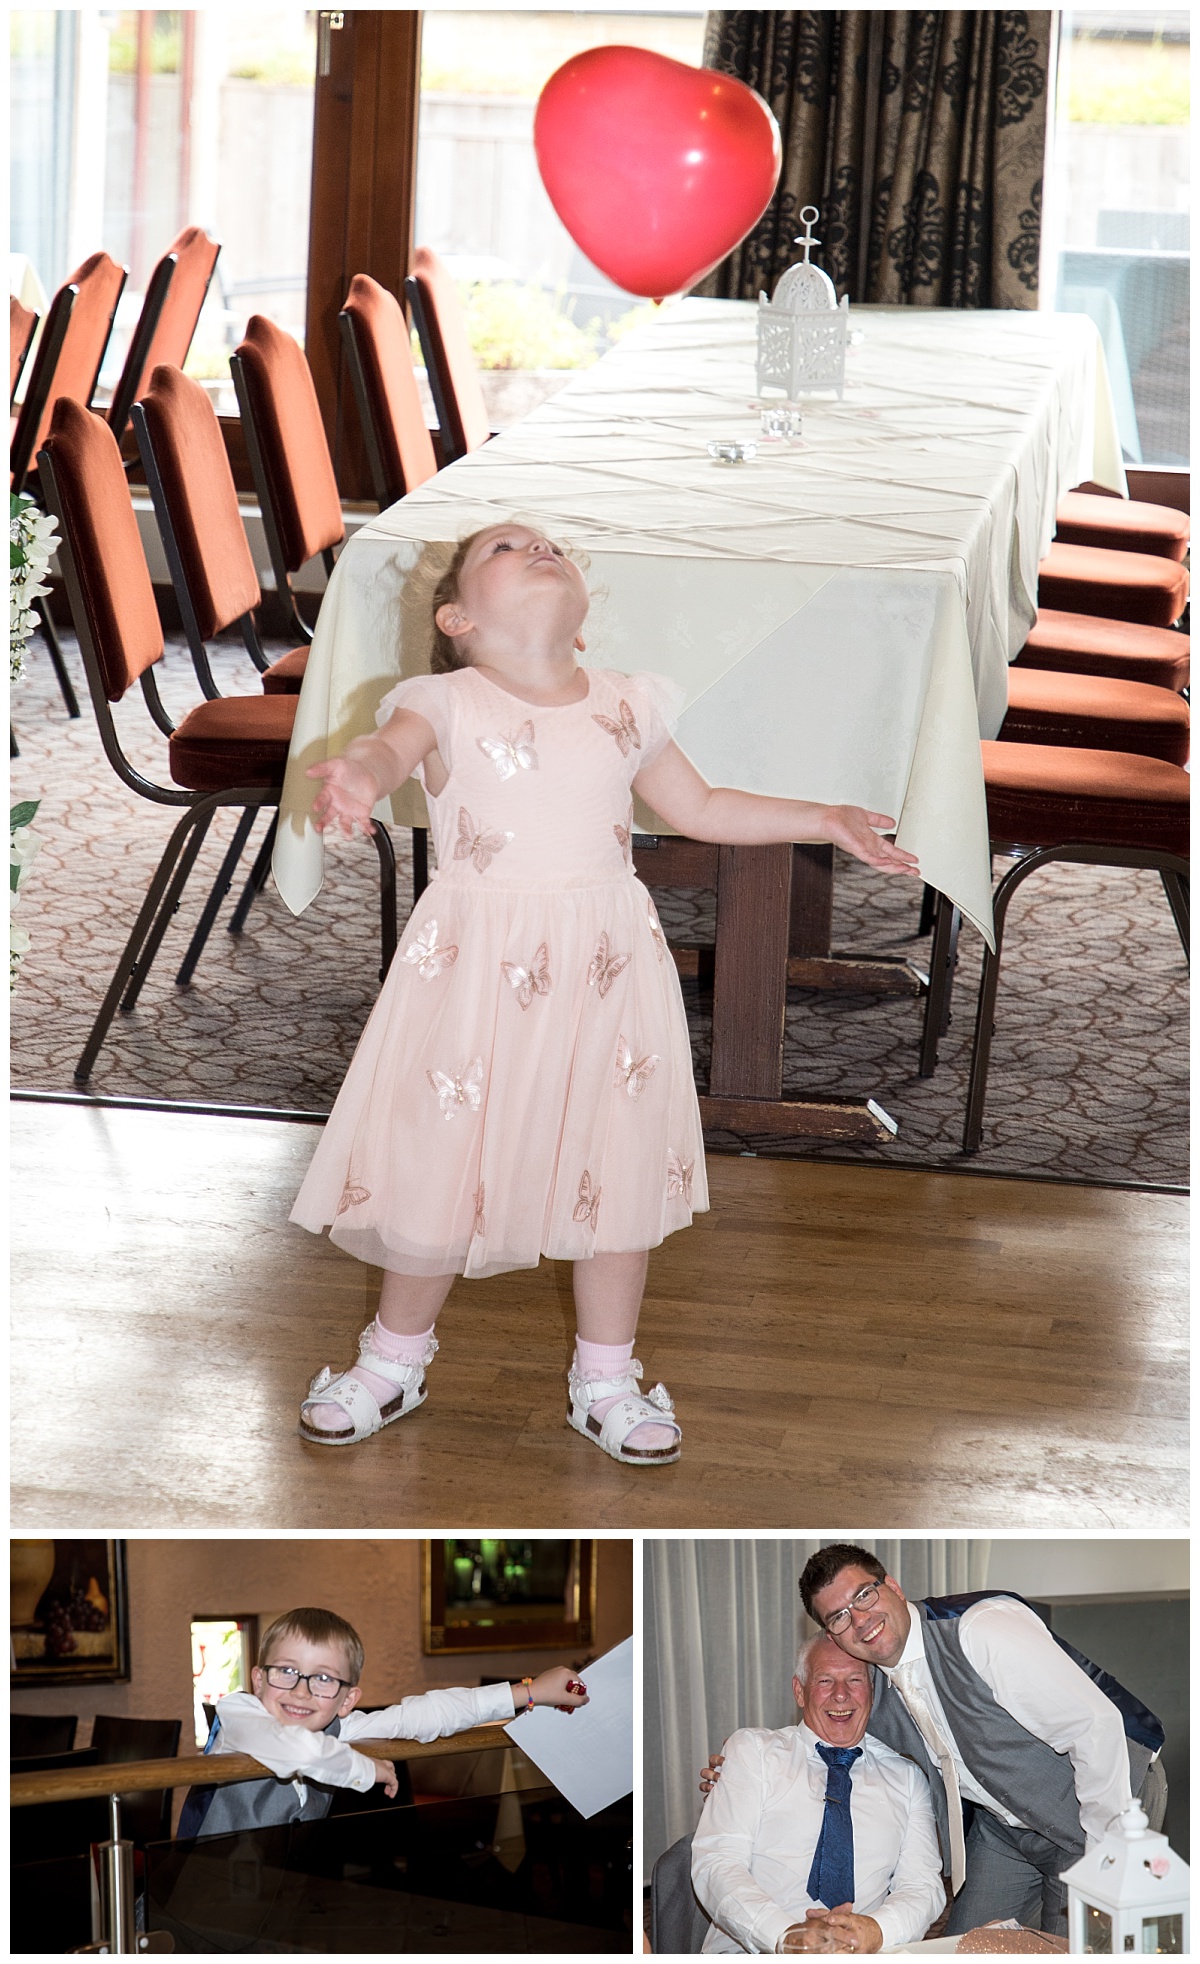 Wedding Photography Manchester - Lisa and James's The Three Horseshoes Country Inn wedding 44